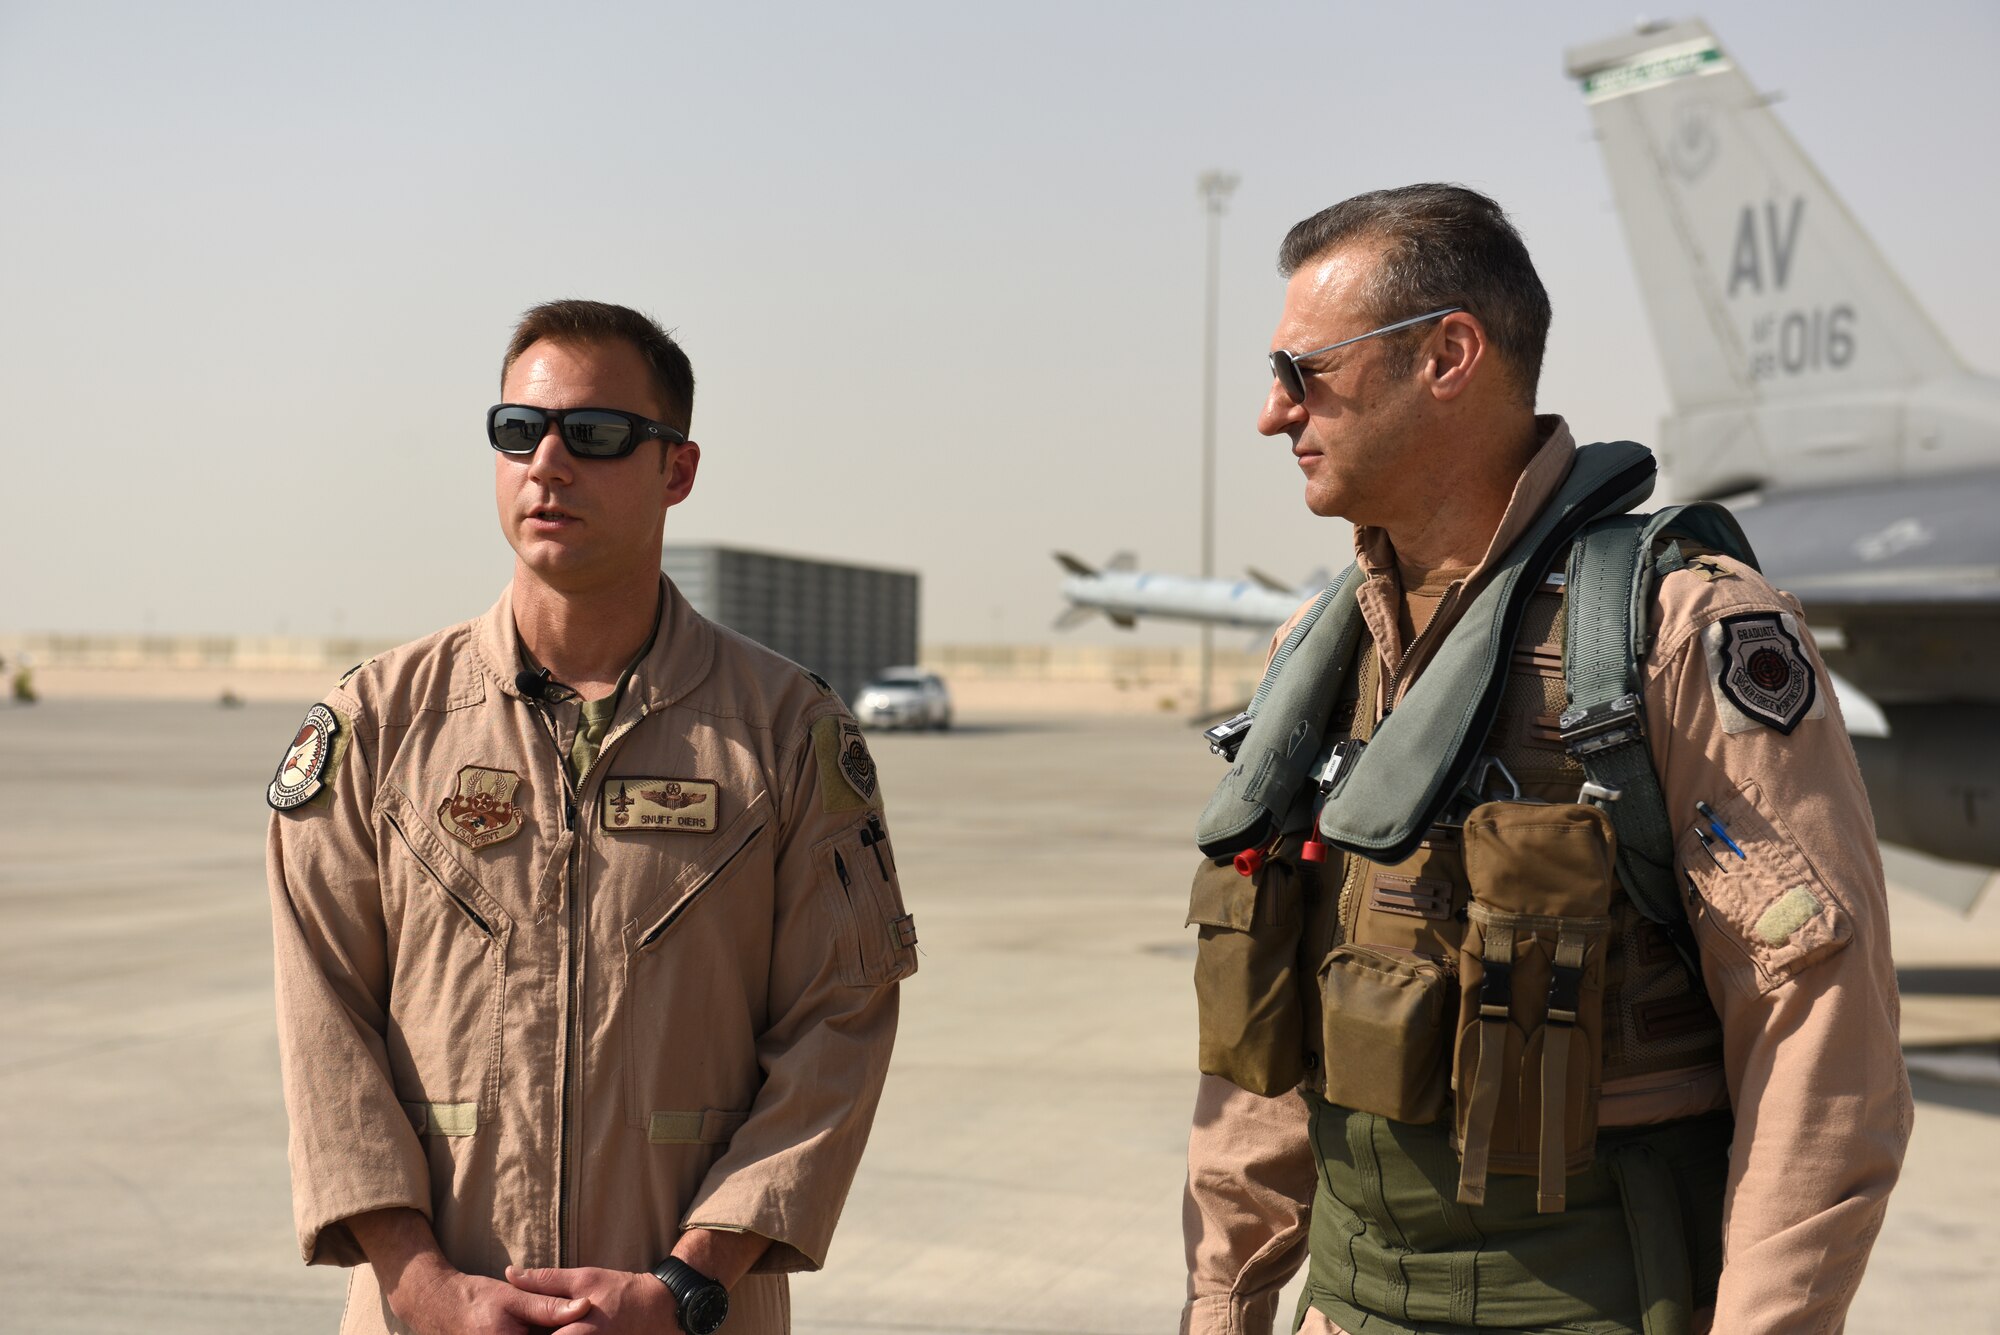 U.S. Air Force Lt. Gen. Joseph Guastella, commander of U.S. Air Forces Central Command, and USAF Lt. Col. Beau Diers, commander of the 555th Fighter Squadron, talk about the squadron’s role and history in AFCENT, Nov. 4, 2019.